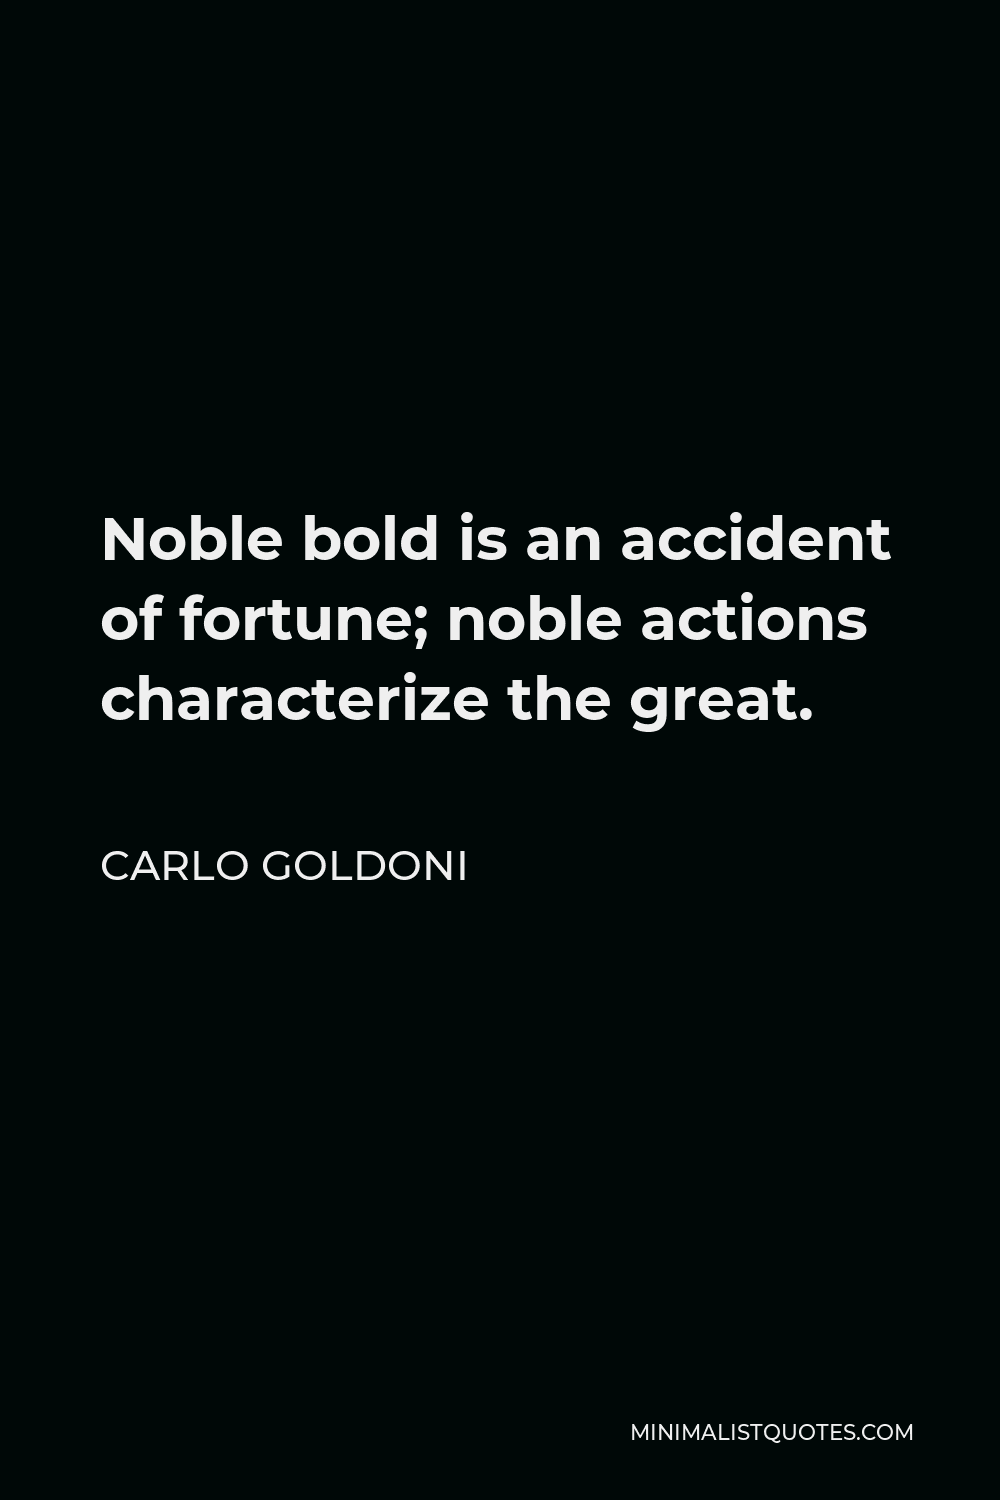 Carlo Goldoni Quote - Noble bold is an accident of fortune; noble actions characterize the great.